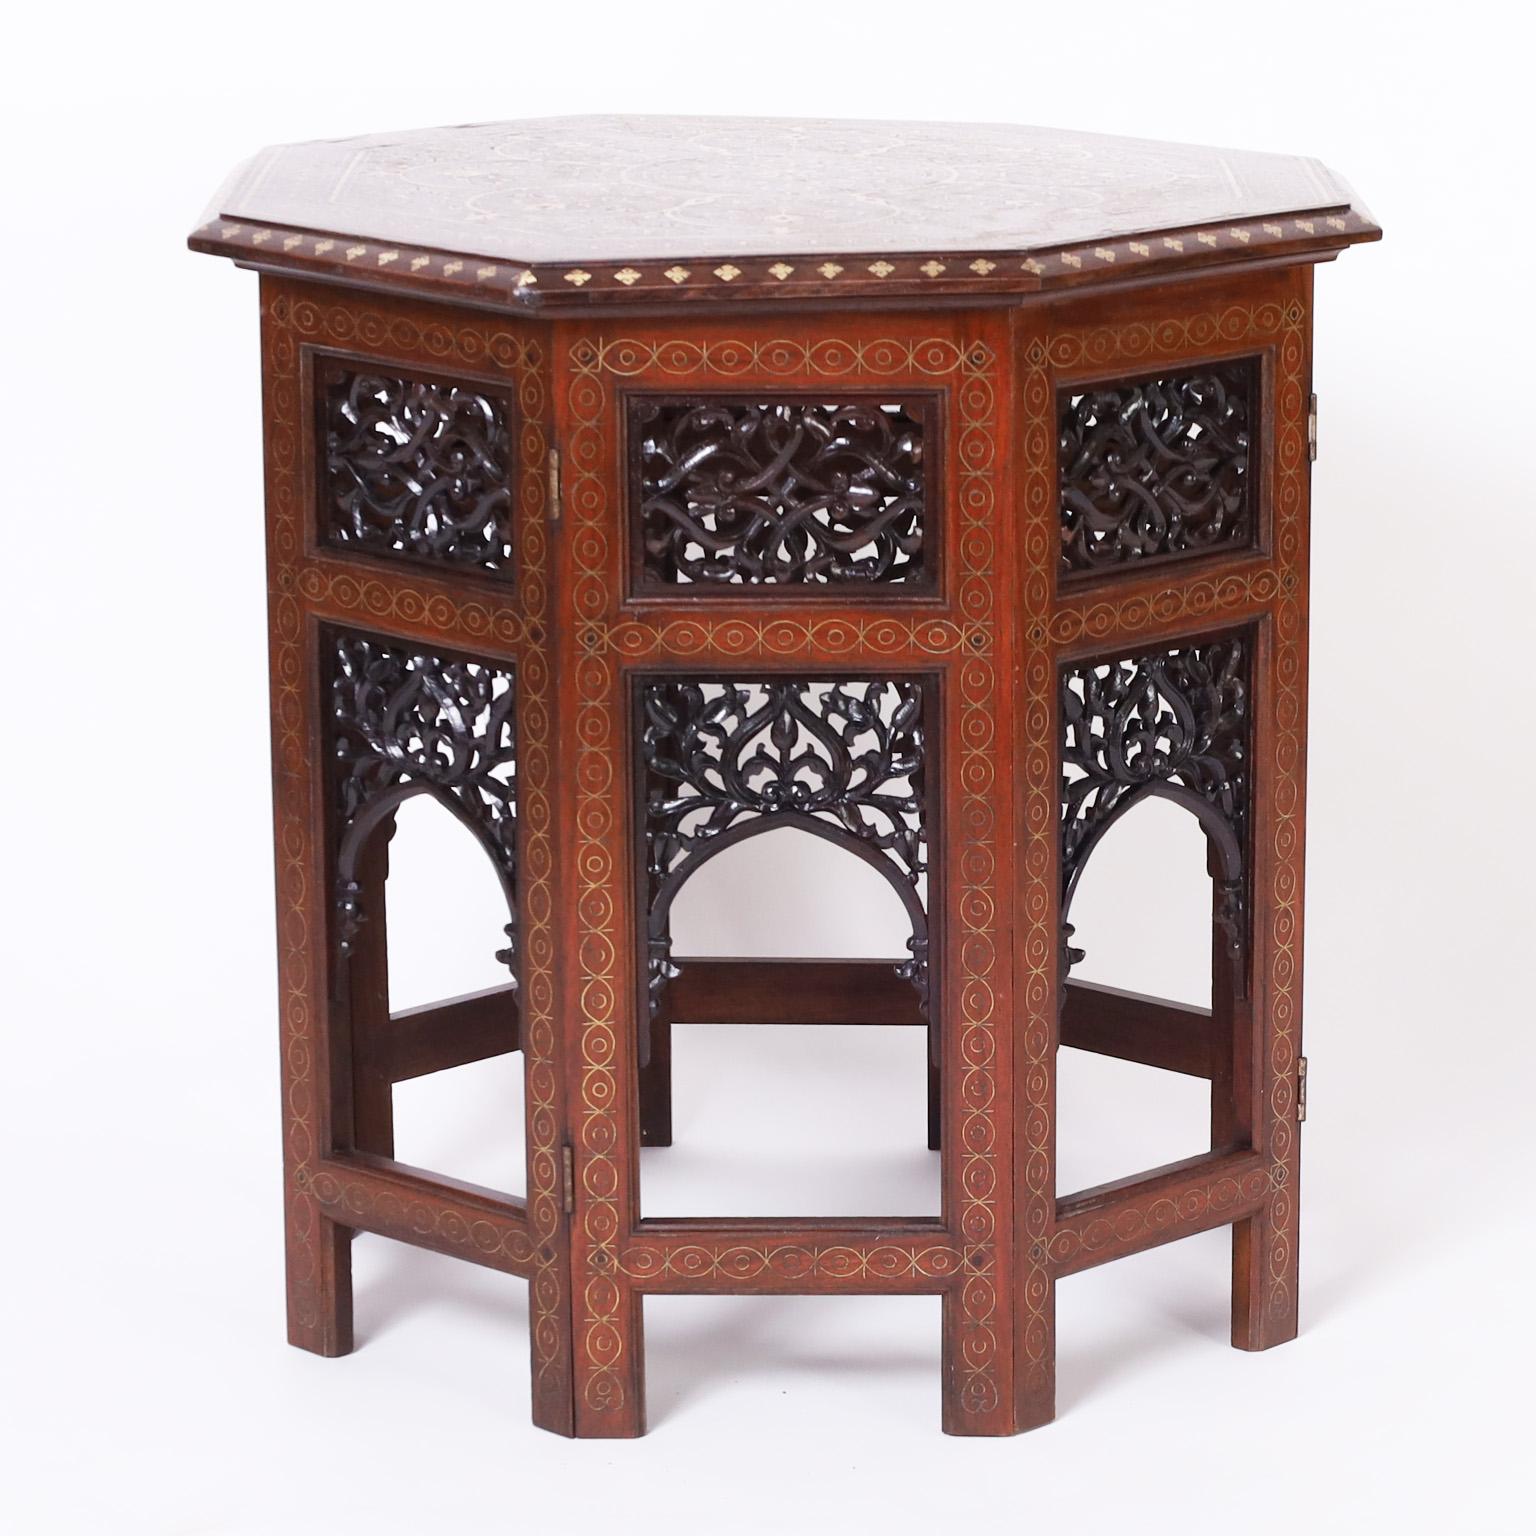 Impressive antique Anglo Indian stand or table with a rosewood octagon top having elaborate brass floral inlays over an eight sided mahogany base with carved and ebonized open fretwork. Complete with historical footnote 